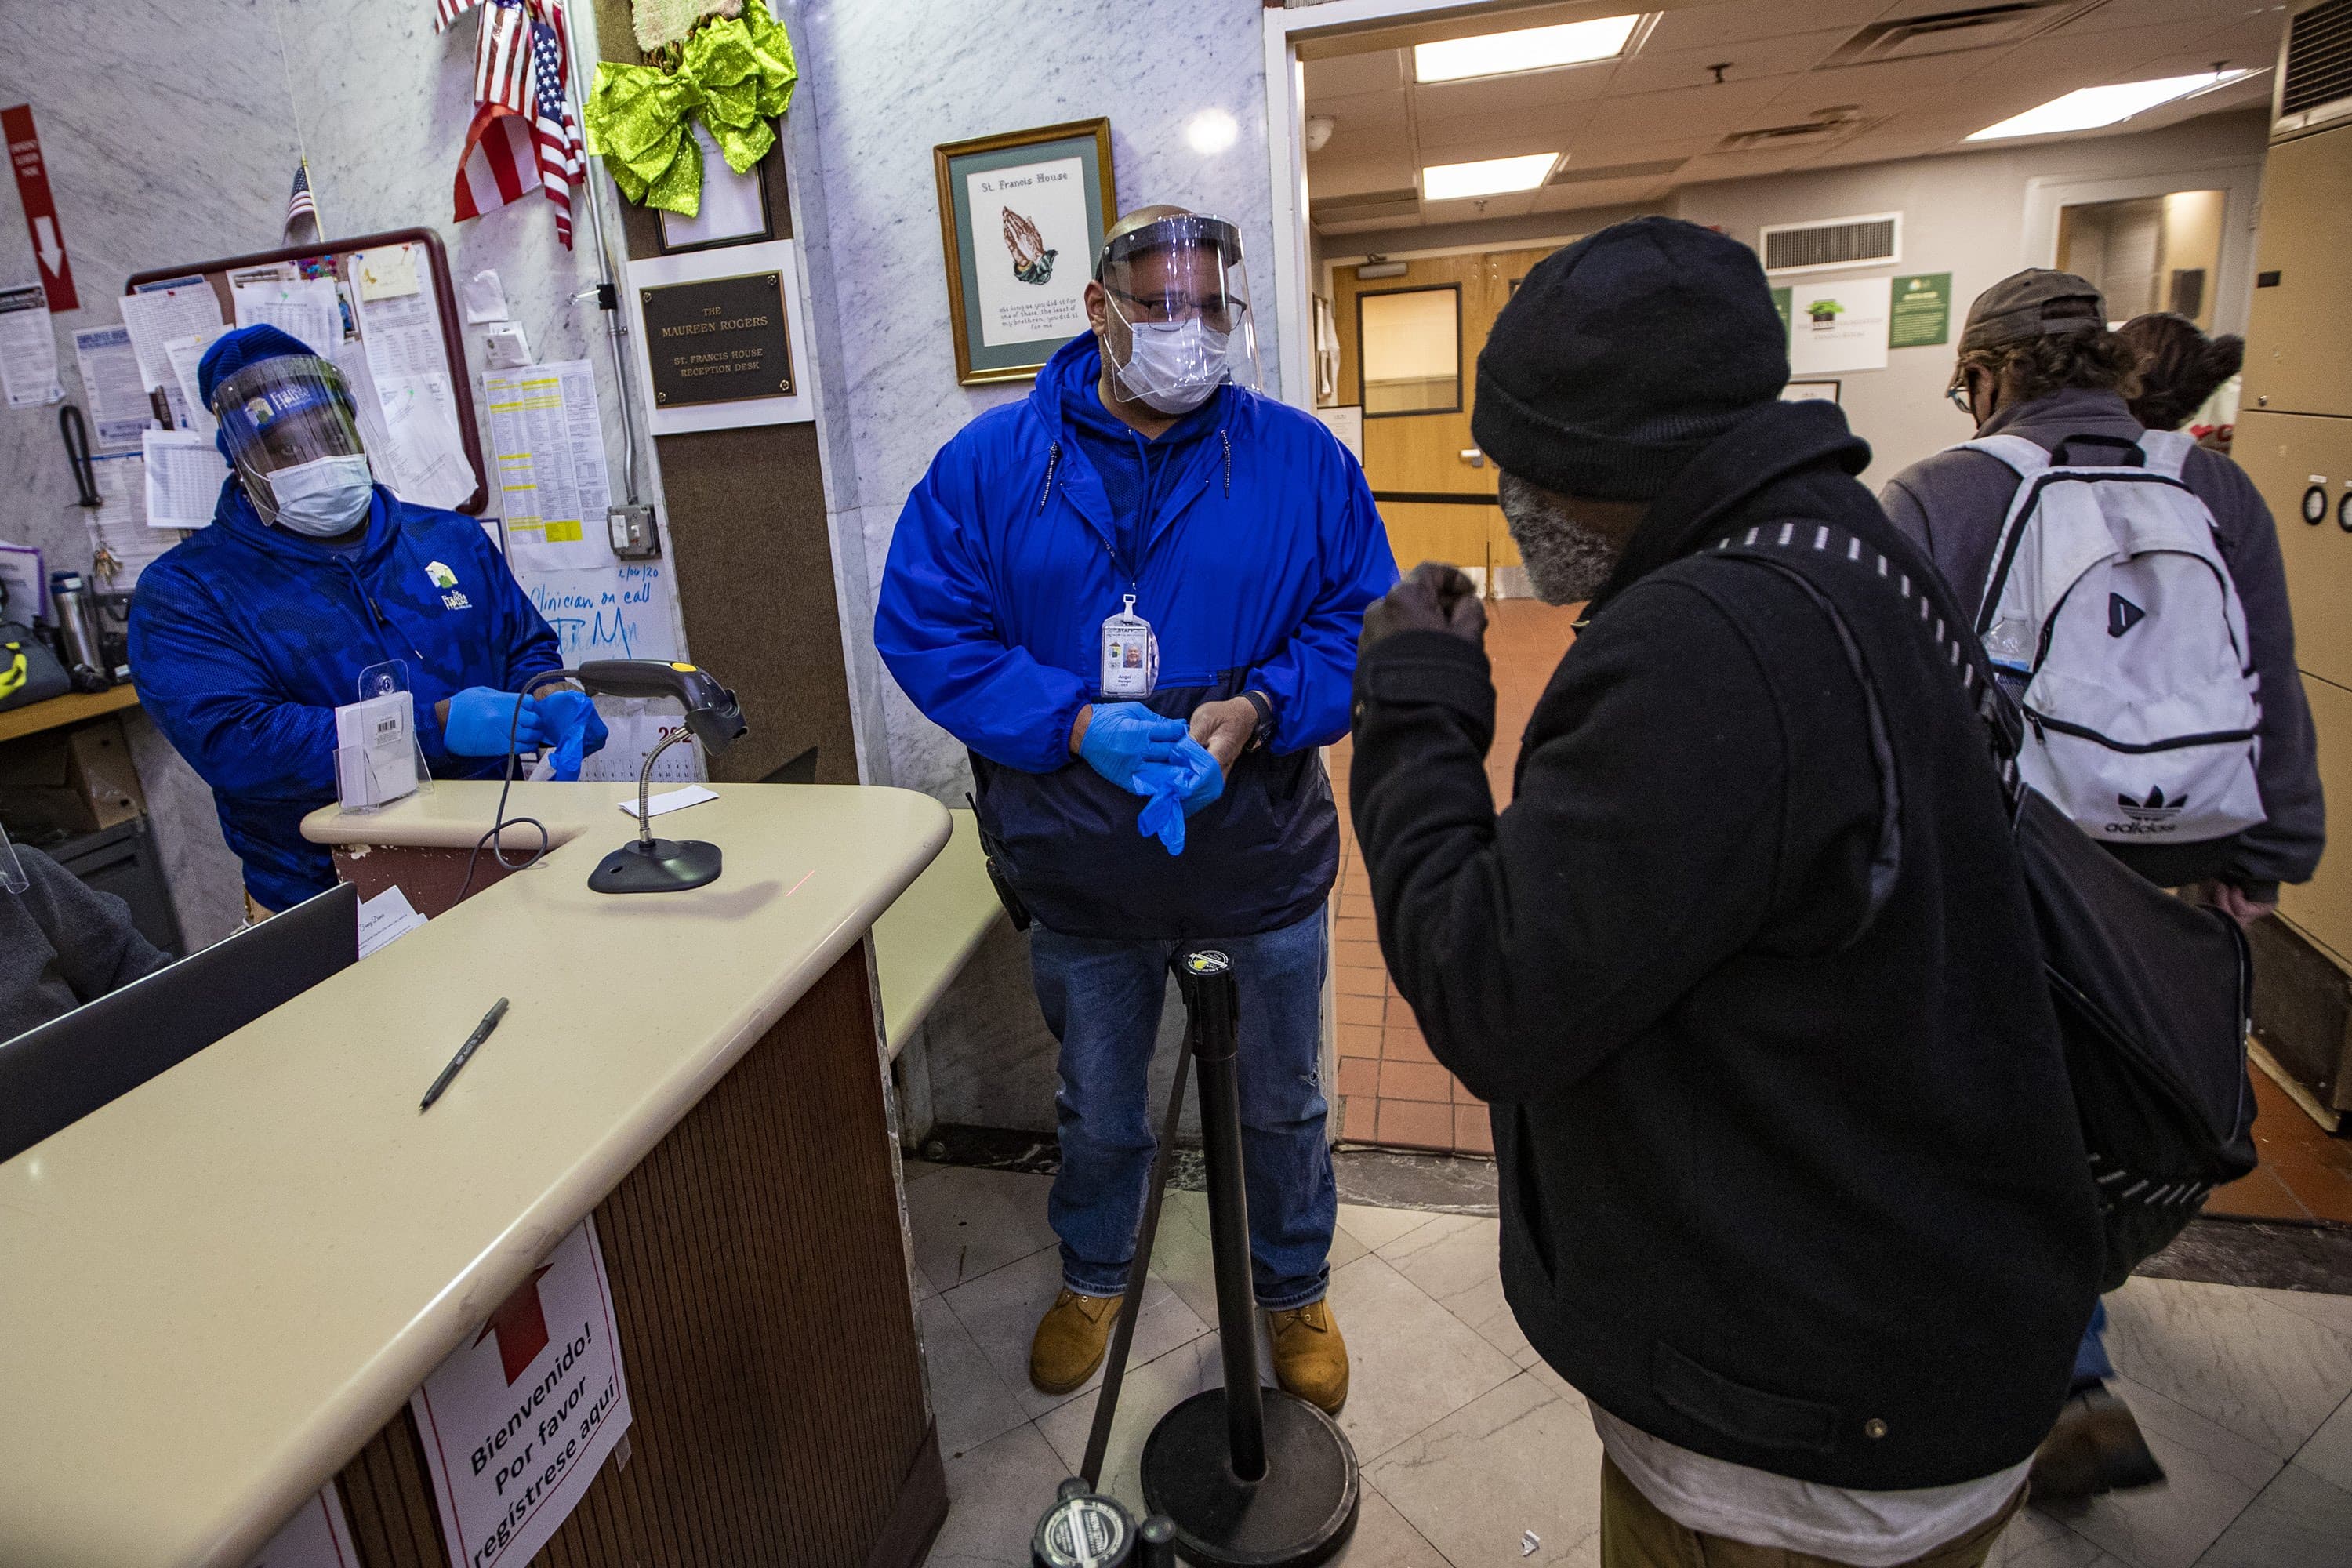 Angel Marte puts on a pair of nitrile gloves before working on some paperwork for a guest entering St. Francis House in Boston. (Jesse Costa/WBUR)